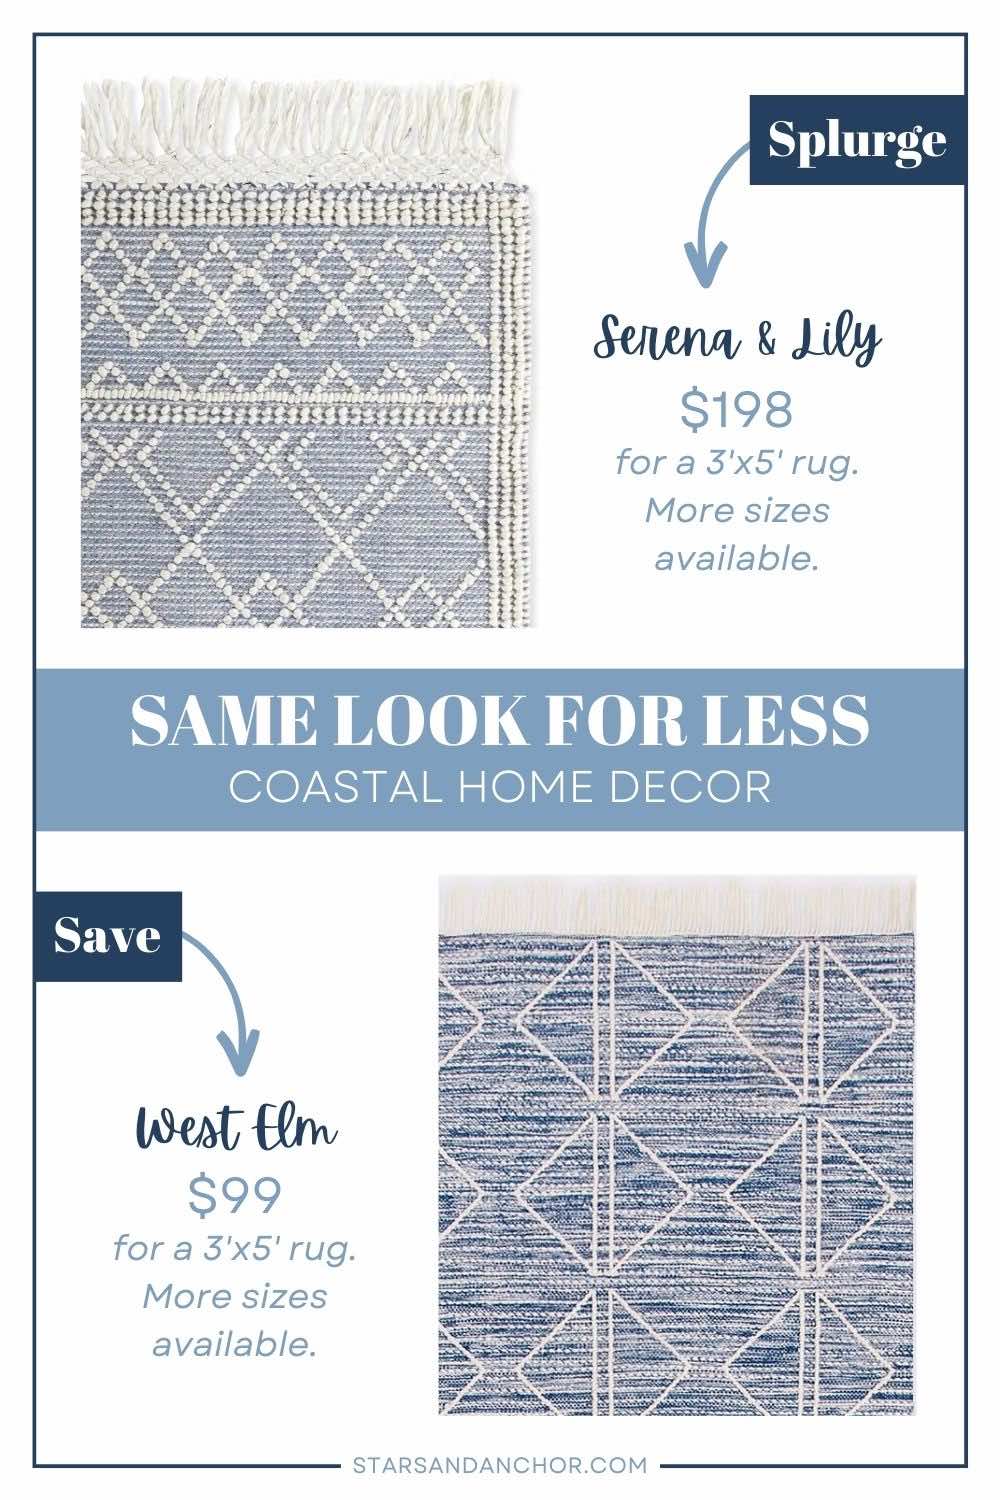 This is a graphic called, "Same Look for Less: Coastal Home Decor." It shows two blue and white area rugs with a diamond pattern that look similar and lists the stores they're from and the price. The first item is labeled, "Splurge: Serena & Lily, $198 for a 3 foot by 5 foot rug. More sizes available." The second item is labeled, "Save: West Elm, $99 for a 3 foot by 5 foot rug. More sizes available." From Stars and Anchor dot com.